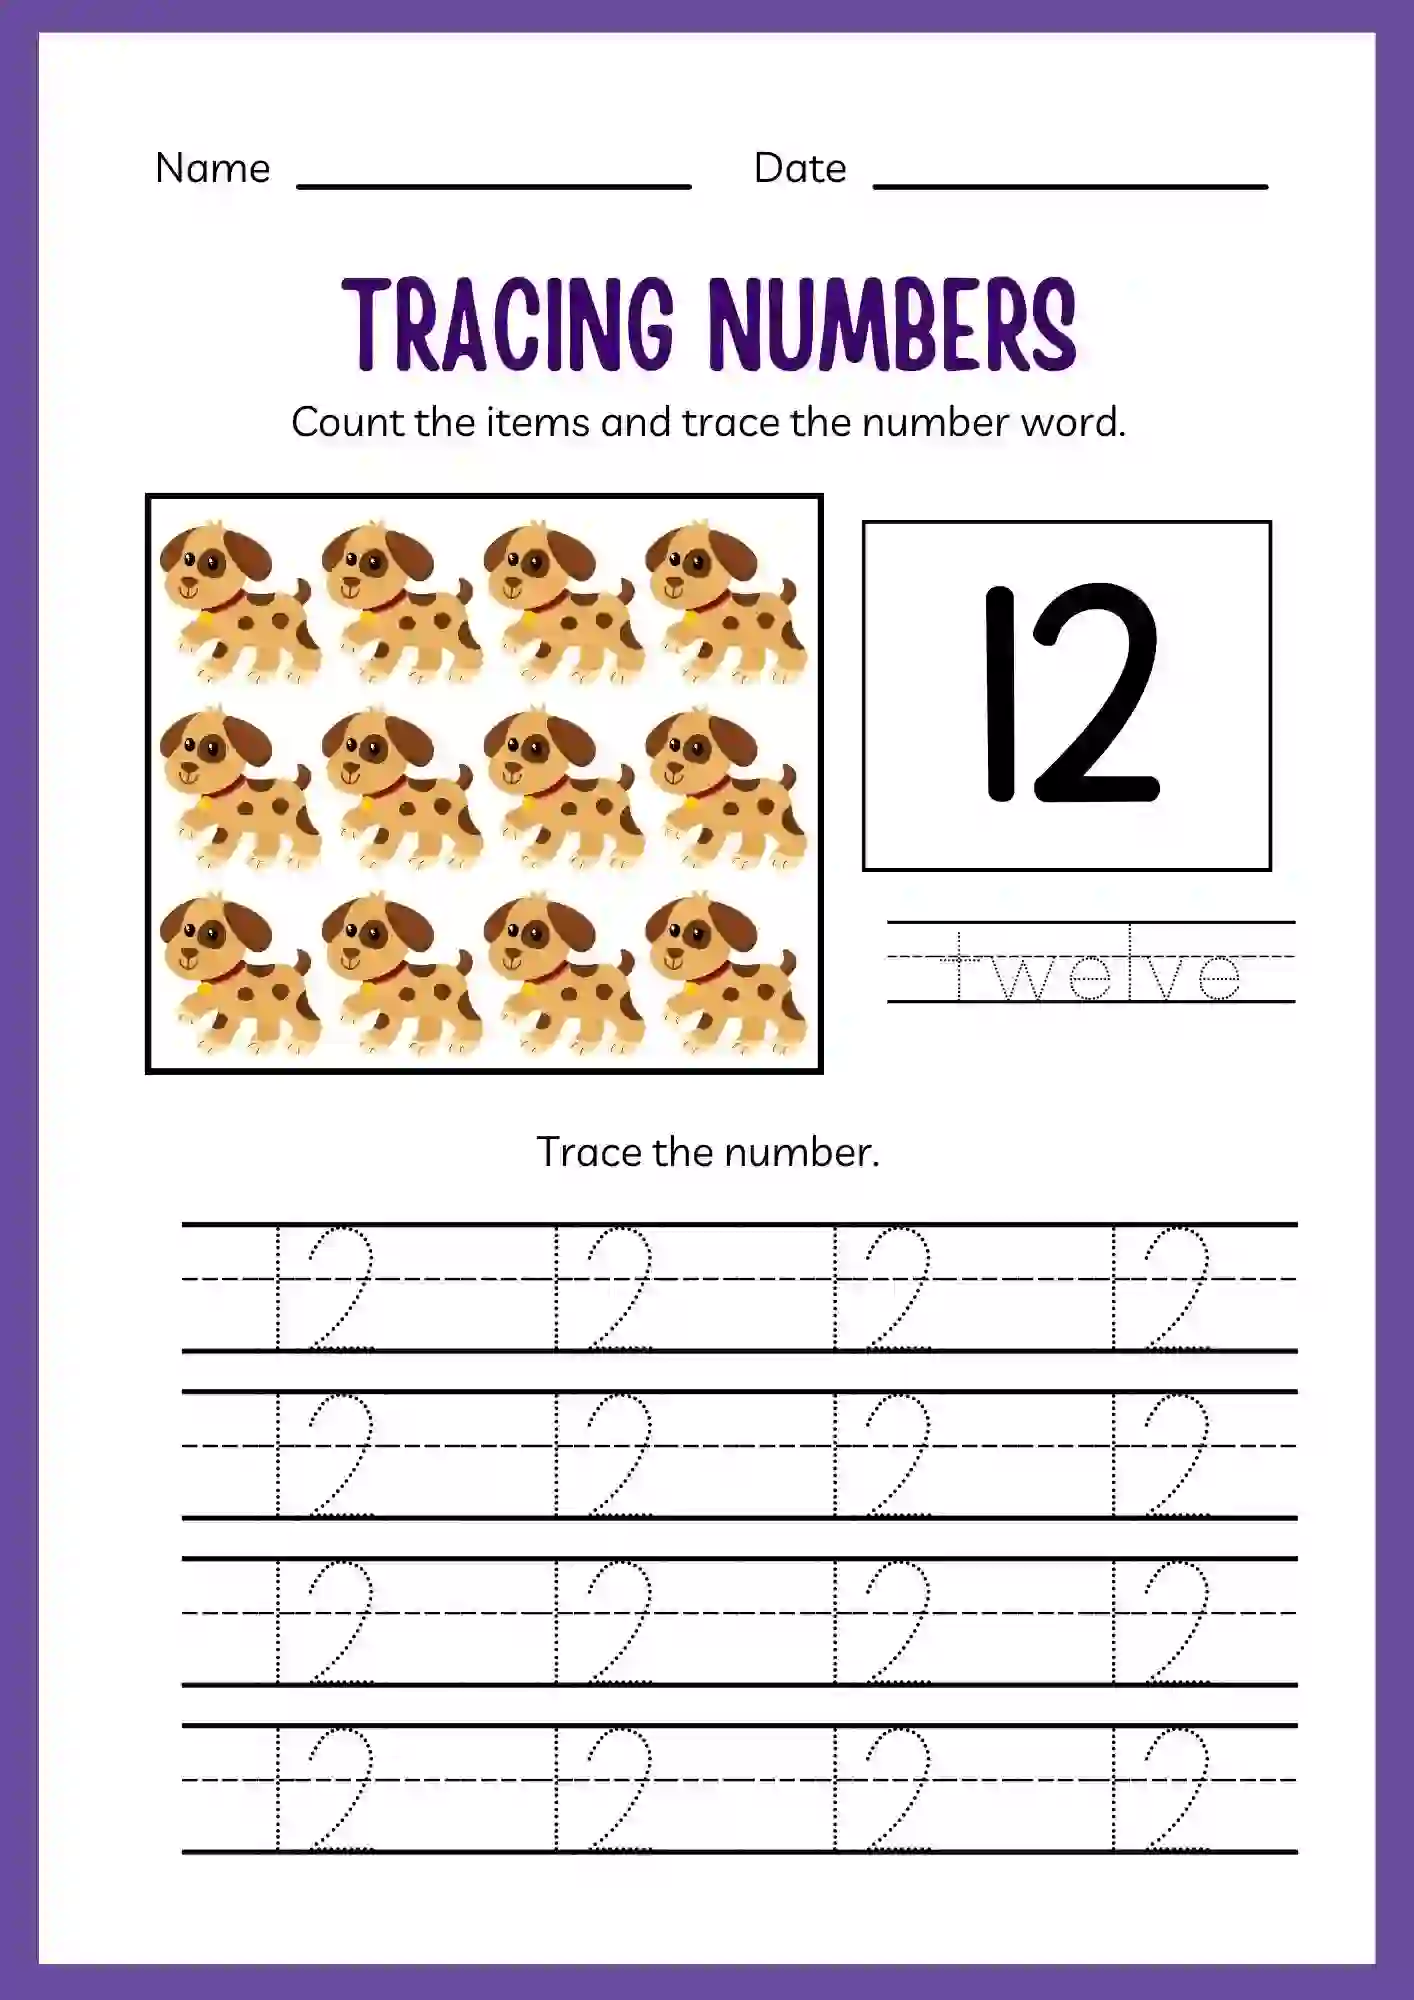 Number Tracing Worksheets 1 to 20 (Number 12 tracing sheet)